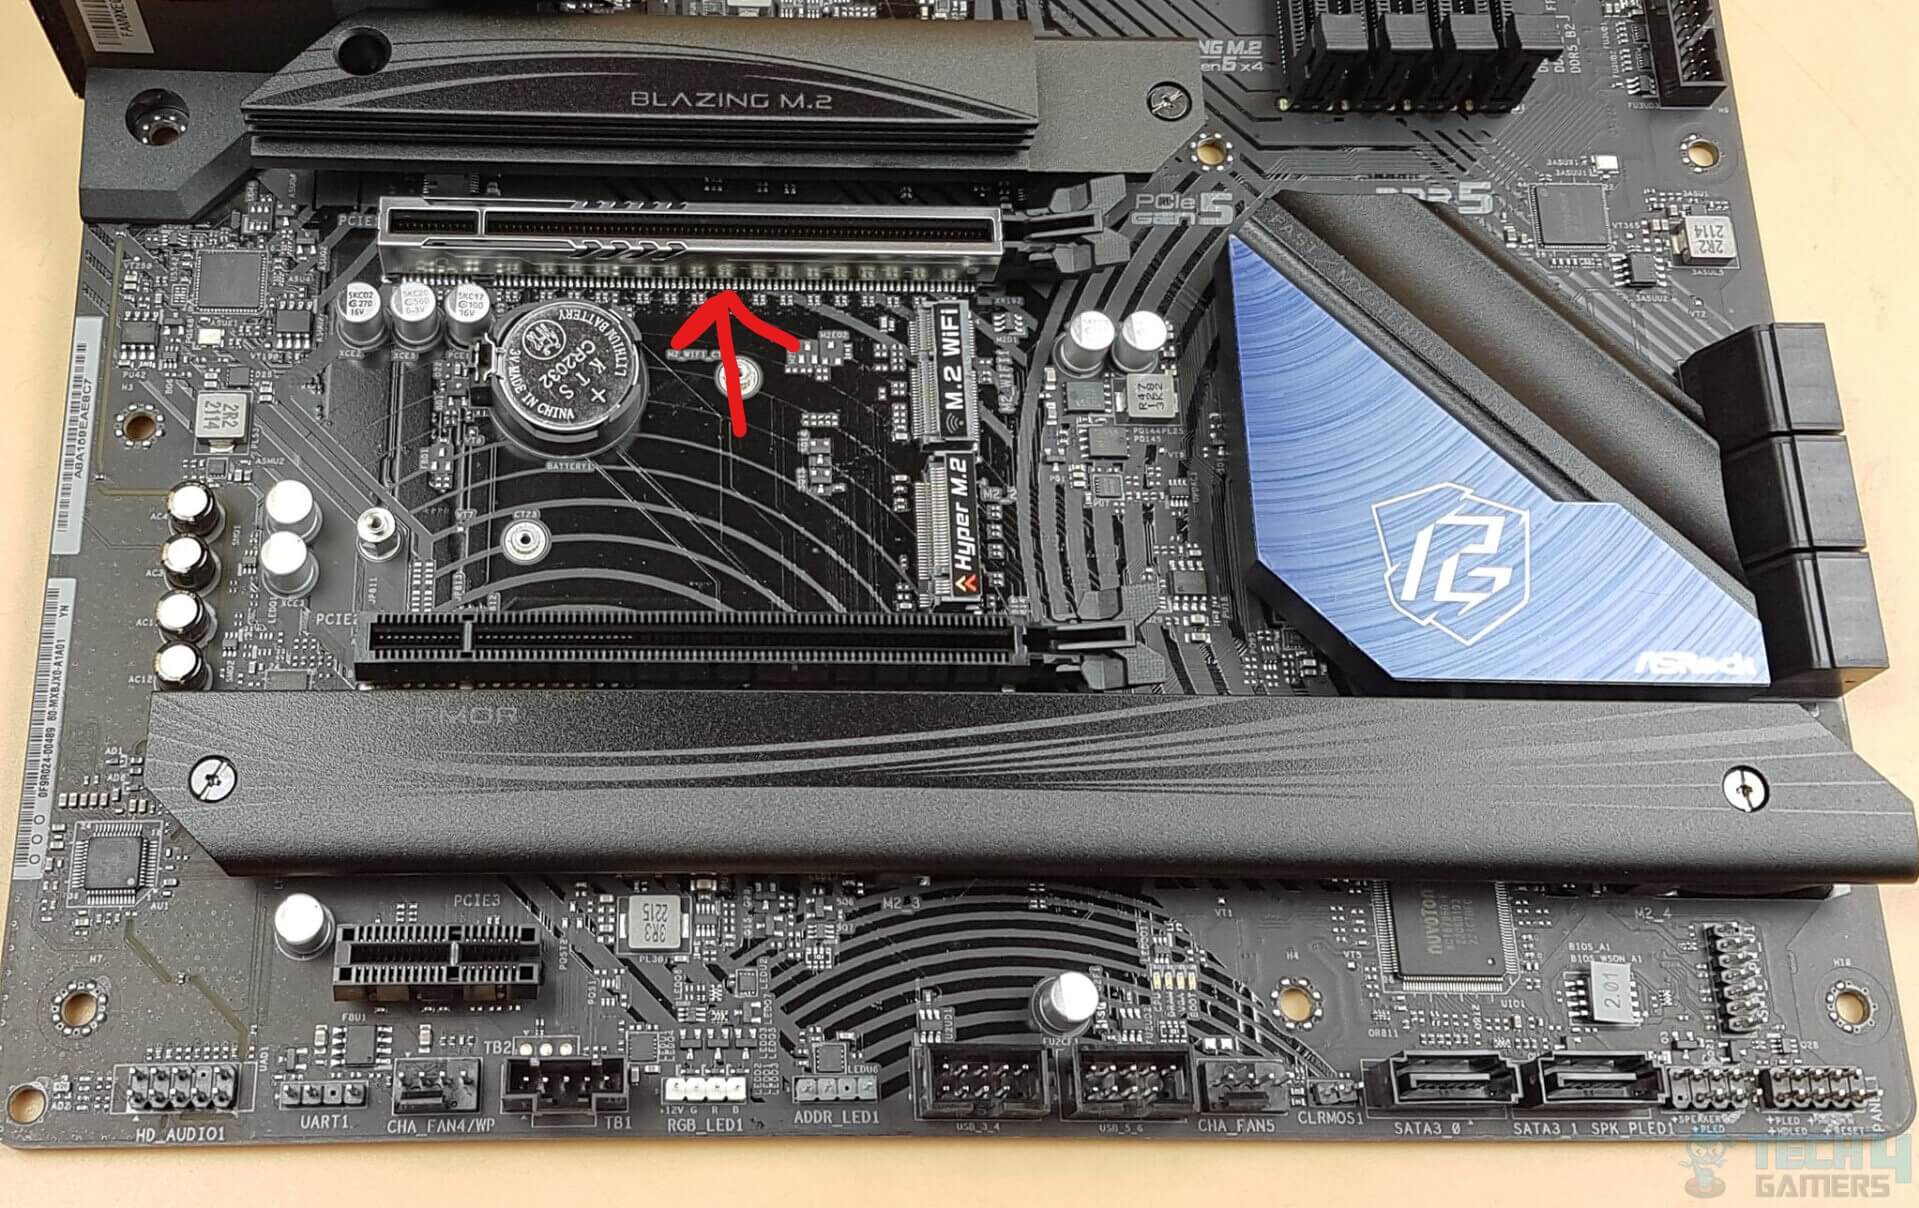 PCIe x16 Slot (Image By Tech4Gamer)